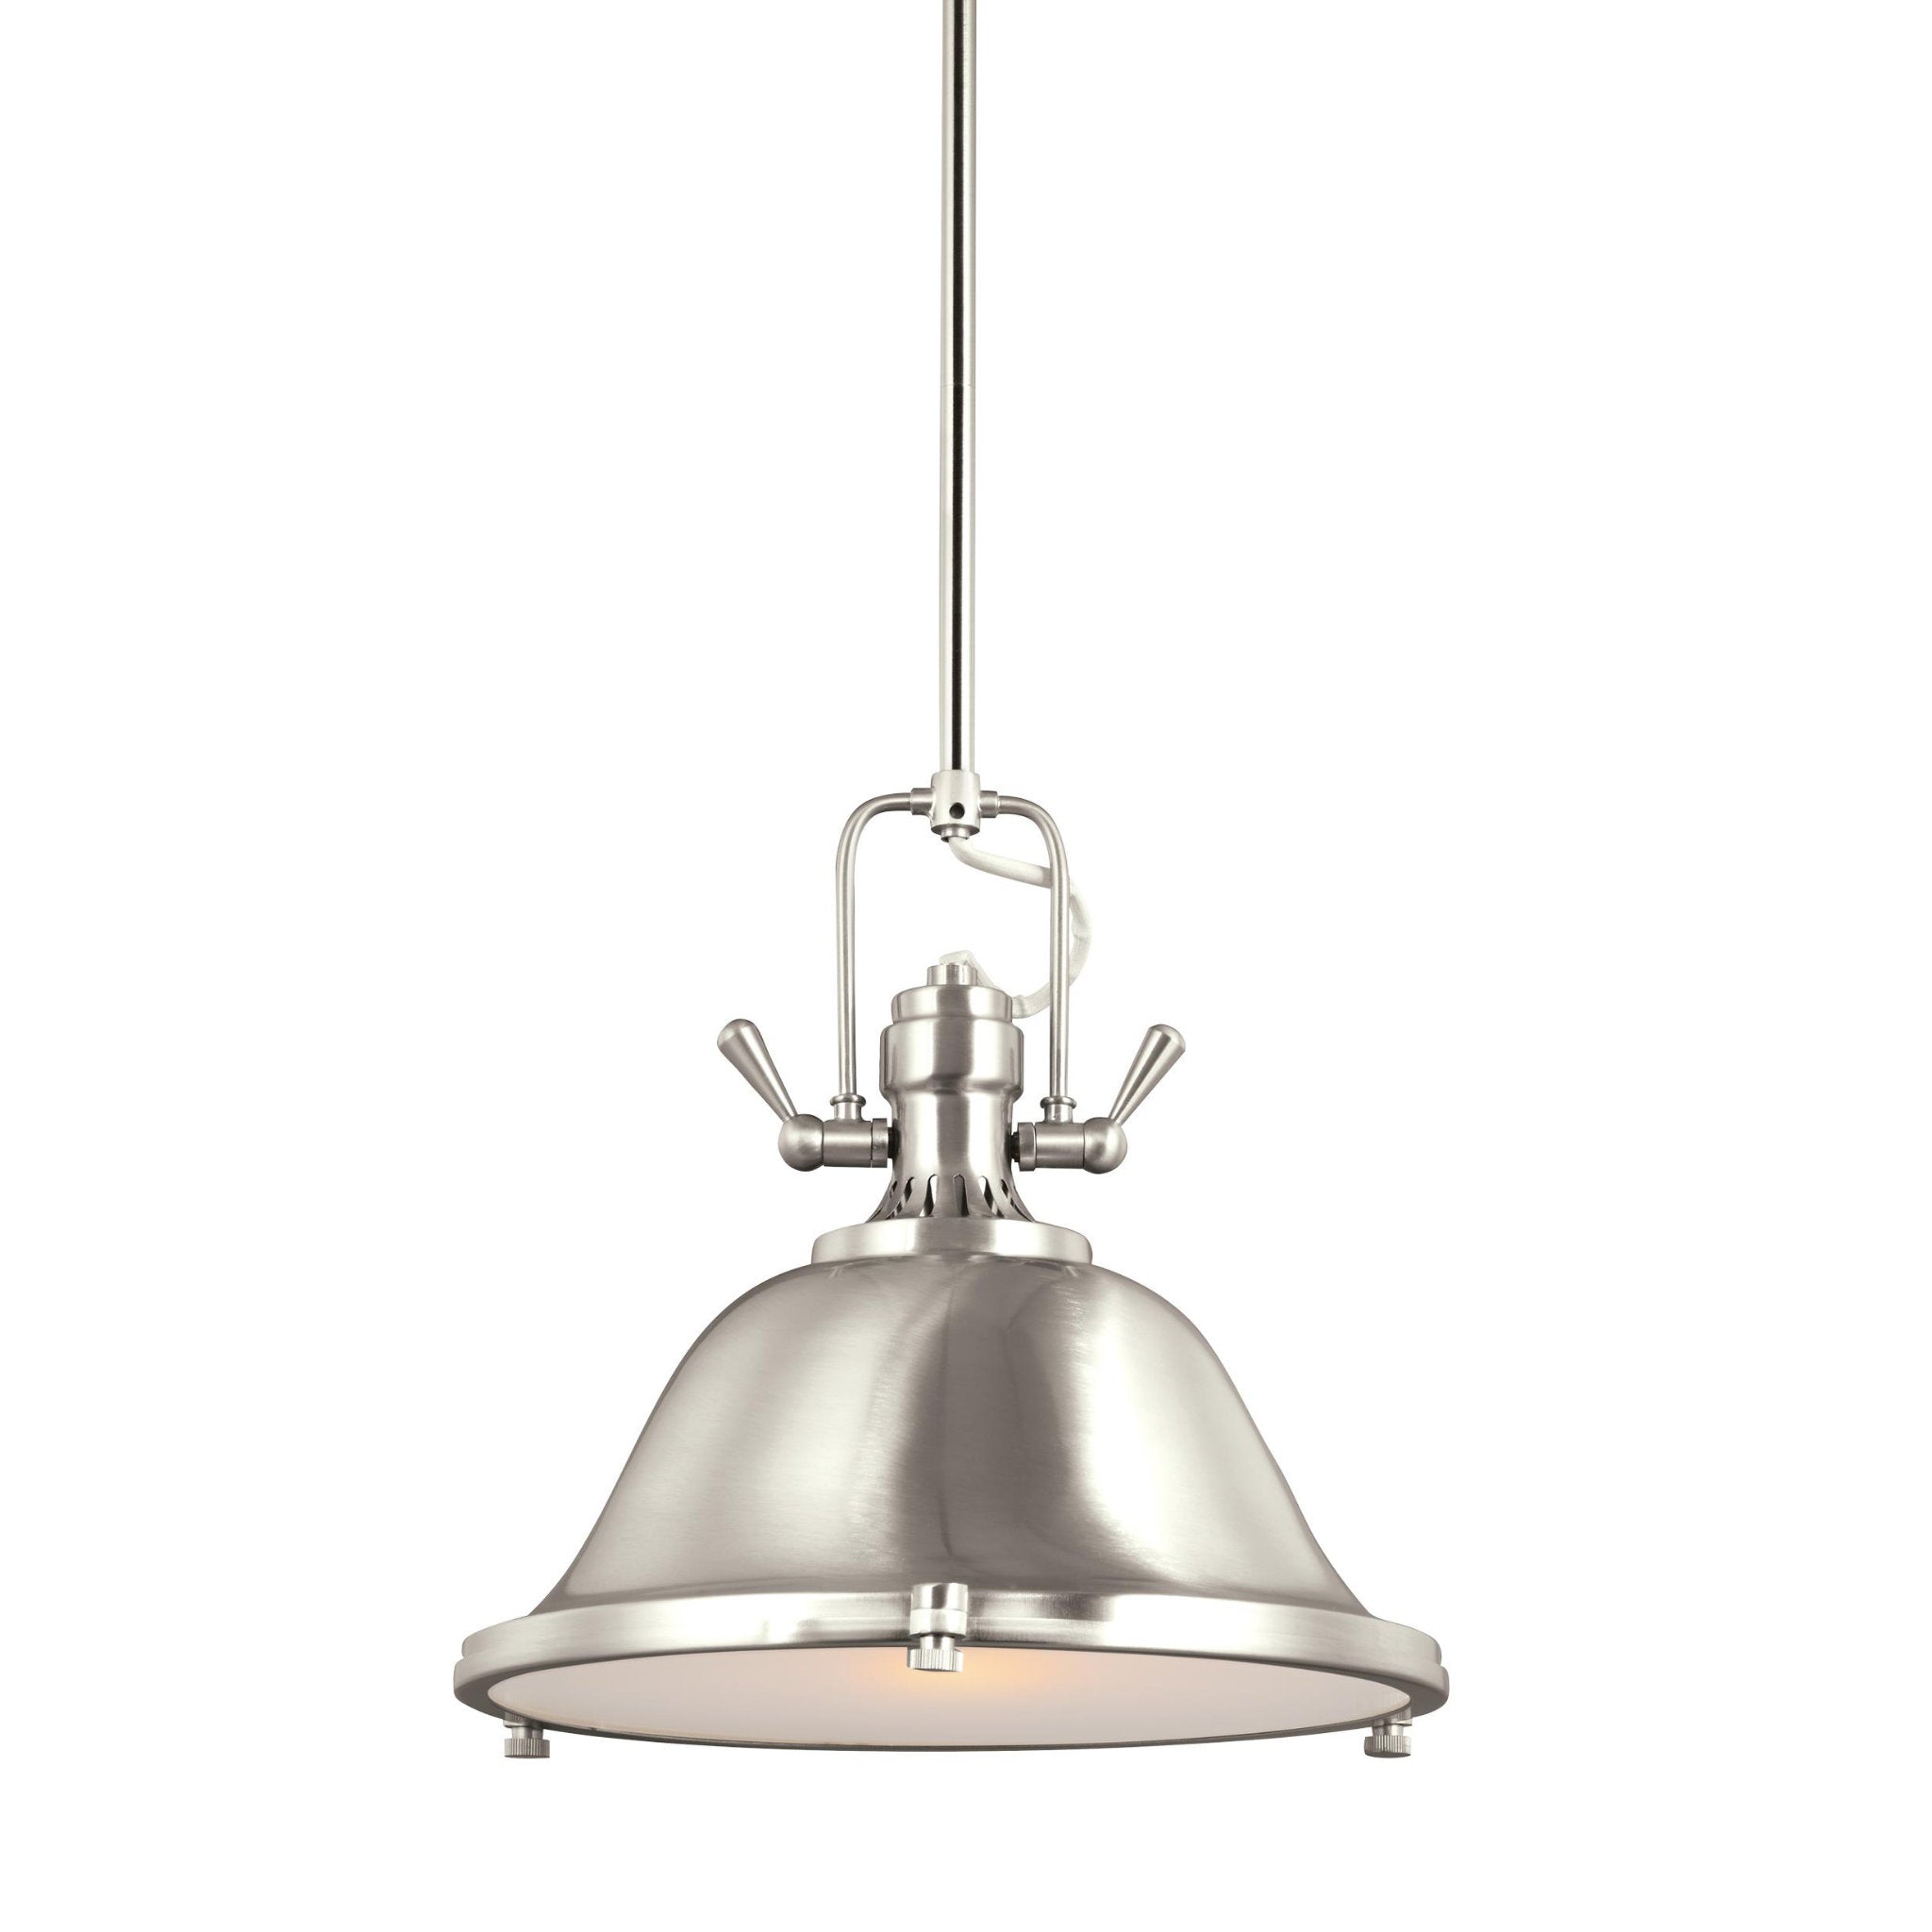 Stone Street One Light Pendant LED Contemporary 12" Height Steel Round Satin Etched Shade in Brushed Nickel